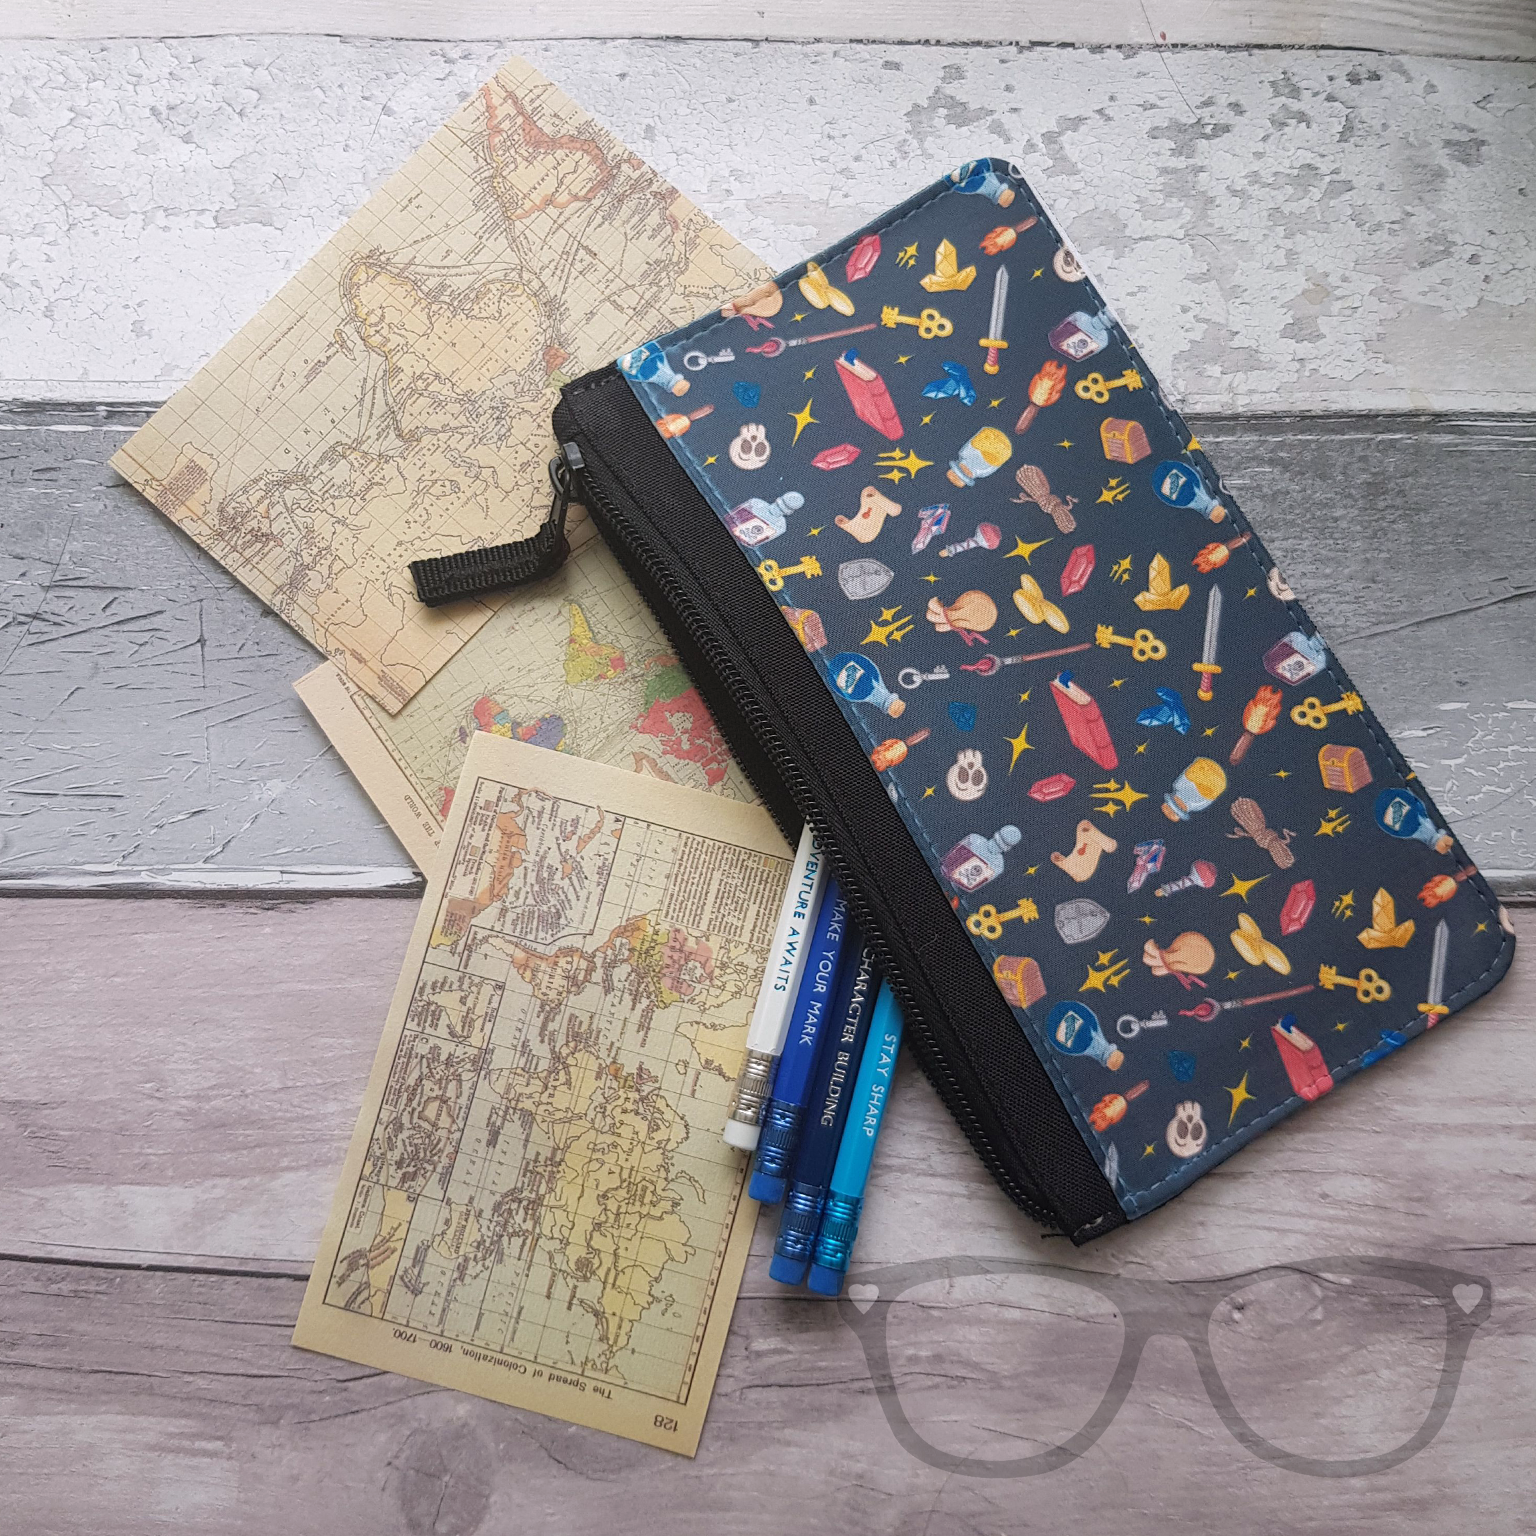 Fantasy genre pencil case shown with small maps and pencils